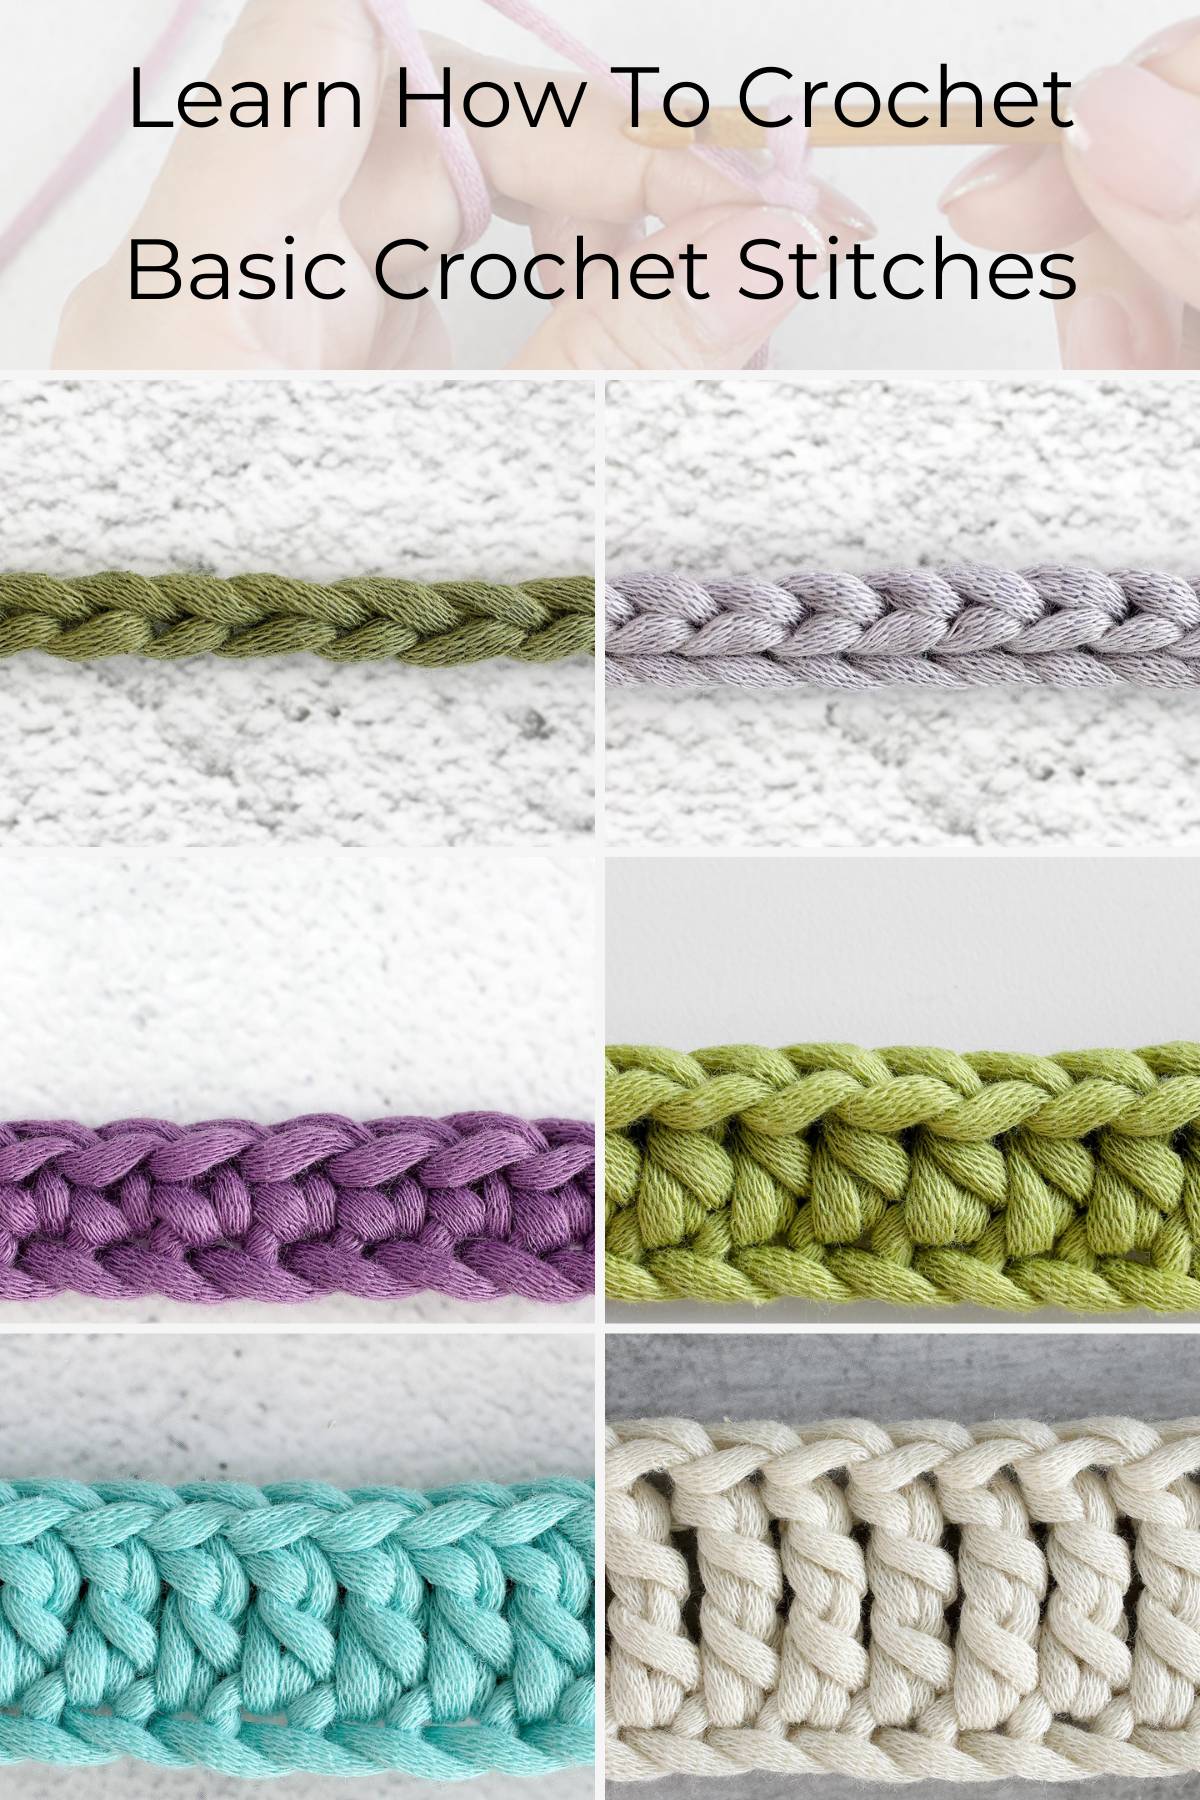 Learning the basic crochet stitches is essential to working on any beginner crochet pattern. The journey to unlocking your crochet creativity begins here.